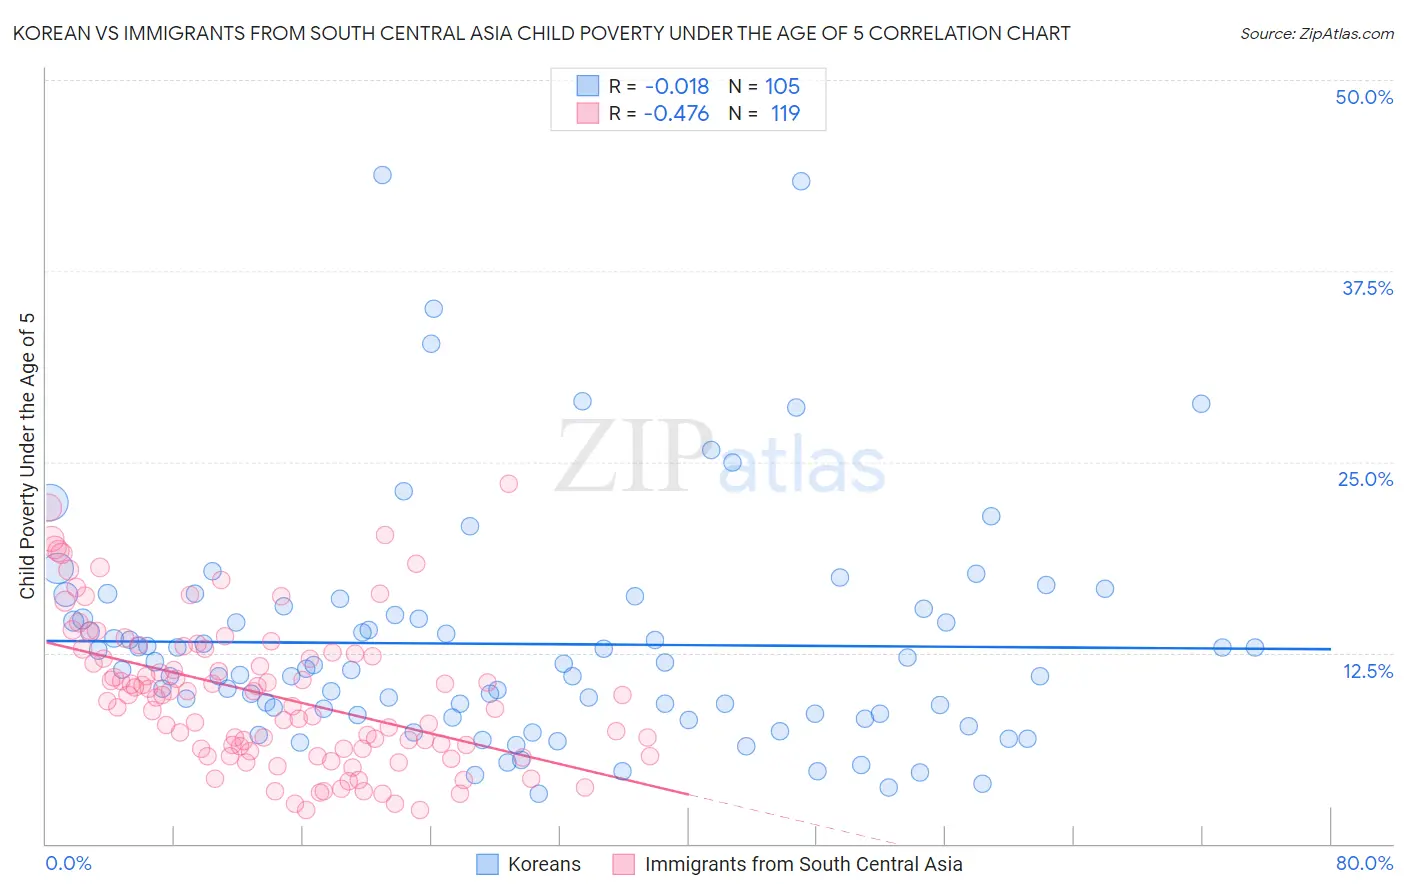 Korean vs Immigrants from South Central Asia Child Poverty Under the Age of 5